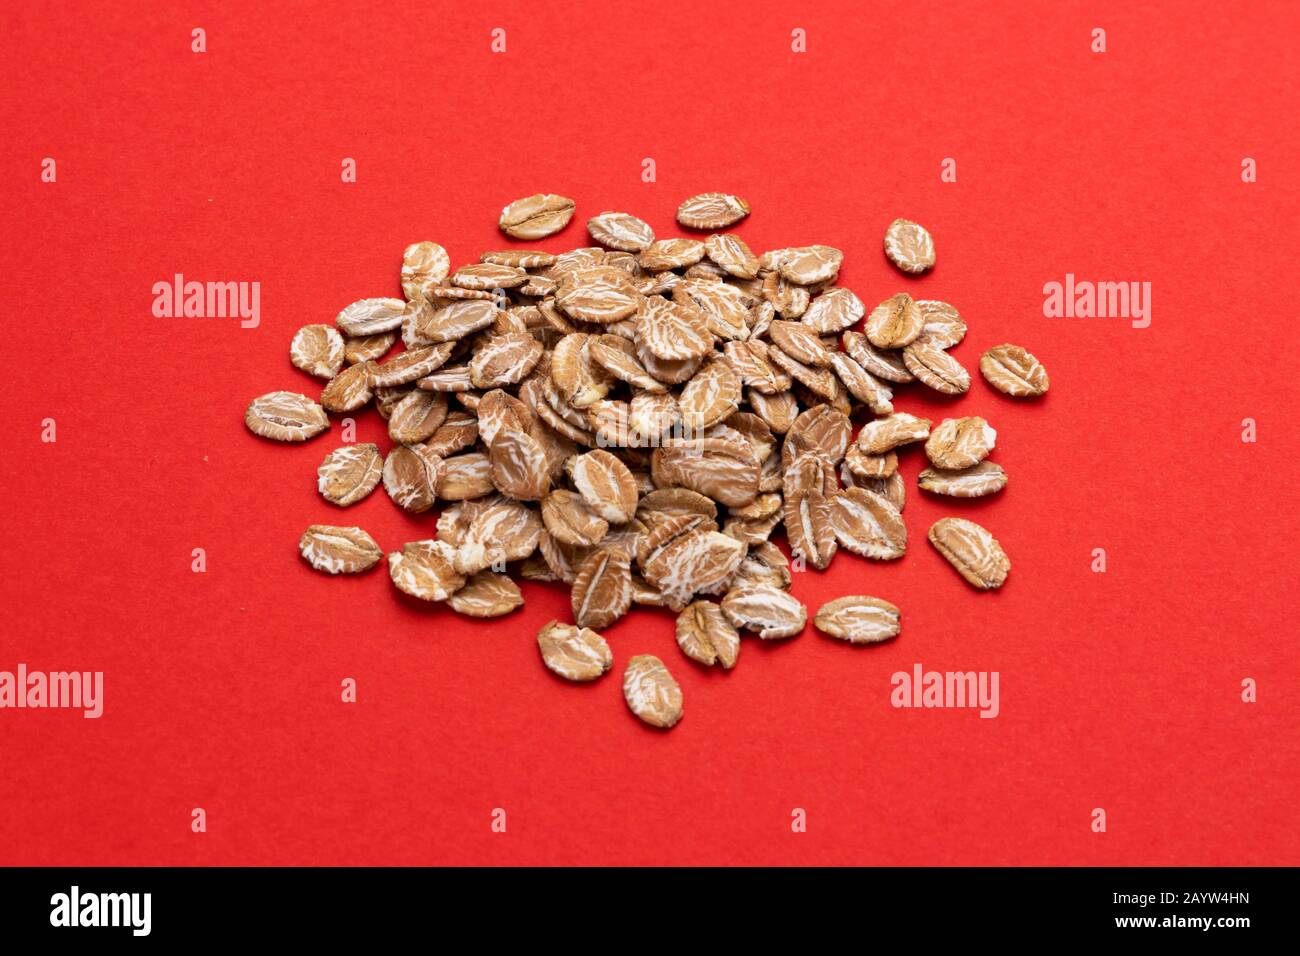 Pile of oat rye flakes on red color background Stock Photo